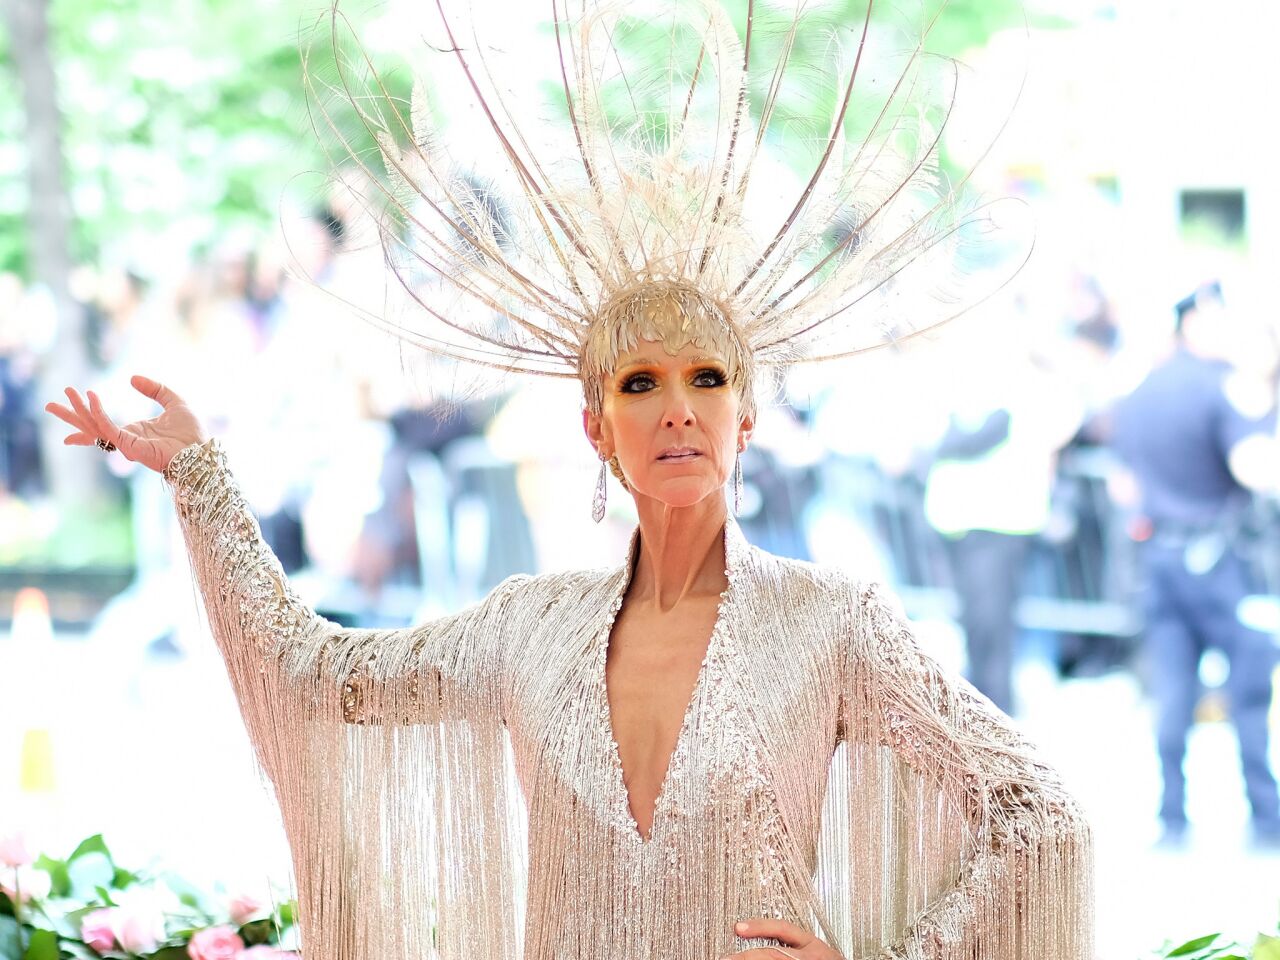 Celine Dion created visual drama with her headpiece and smoky eyes.